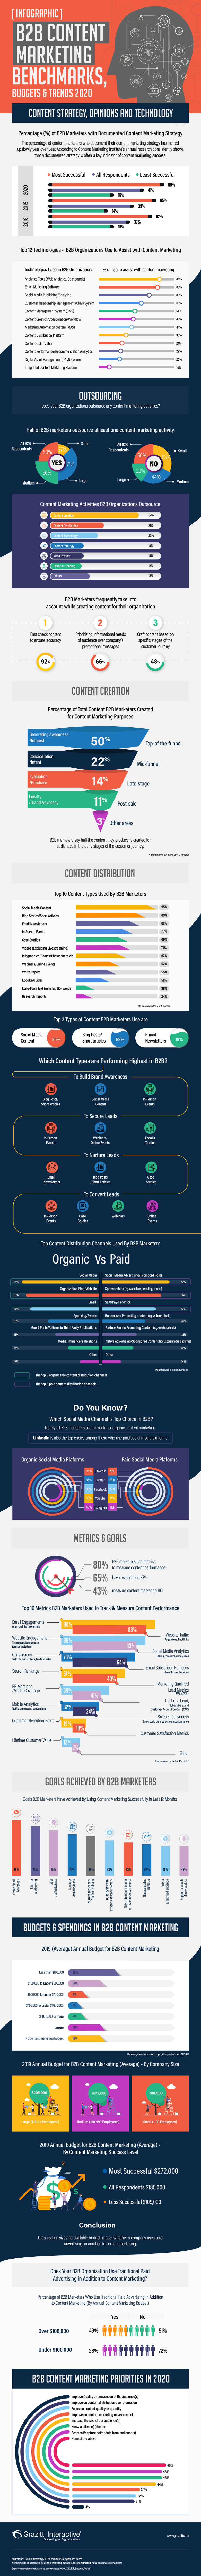 B2B Content Marketing Benchmarks, Budgets and Trends 2020